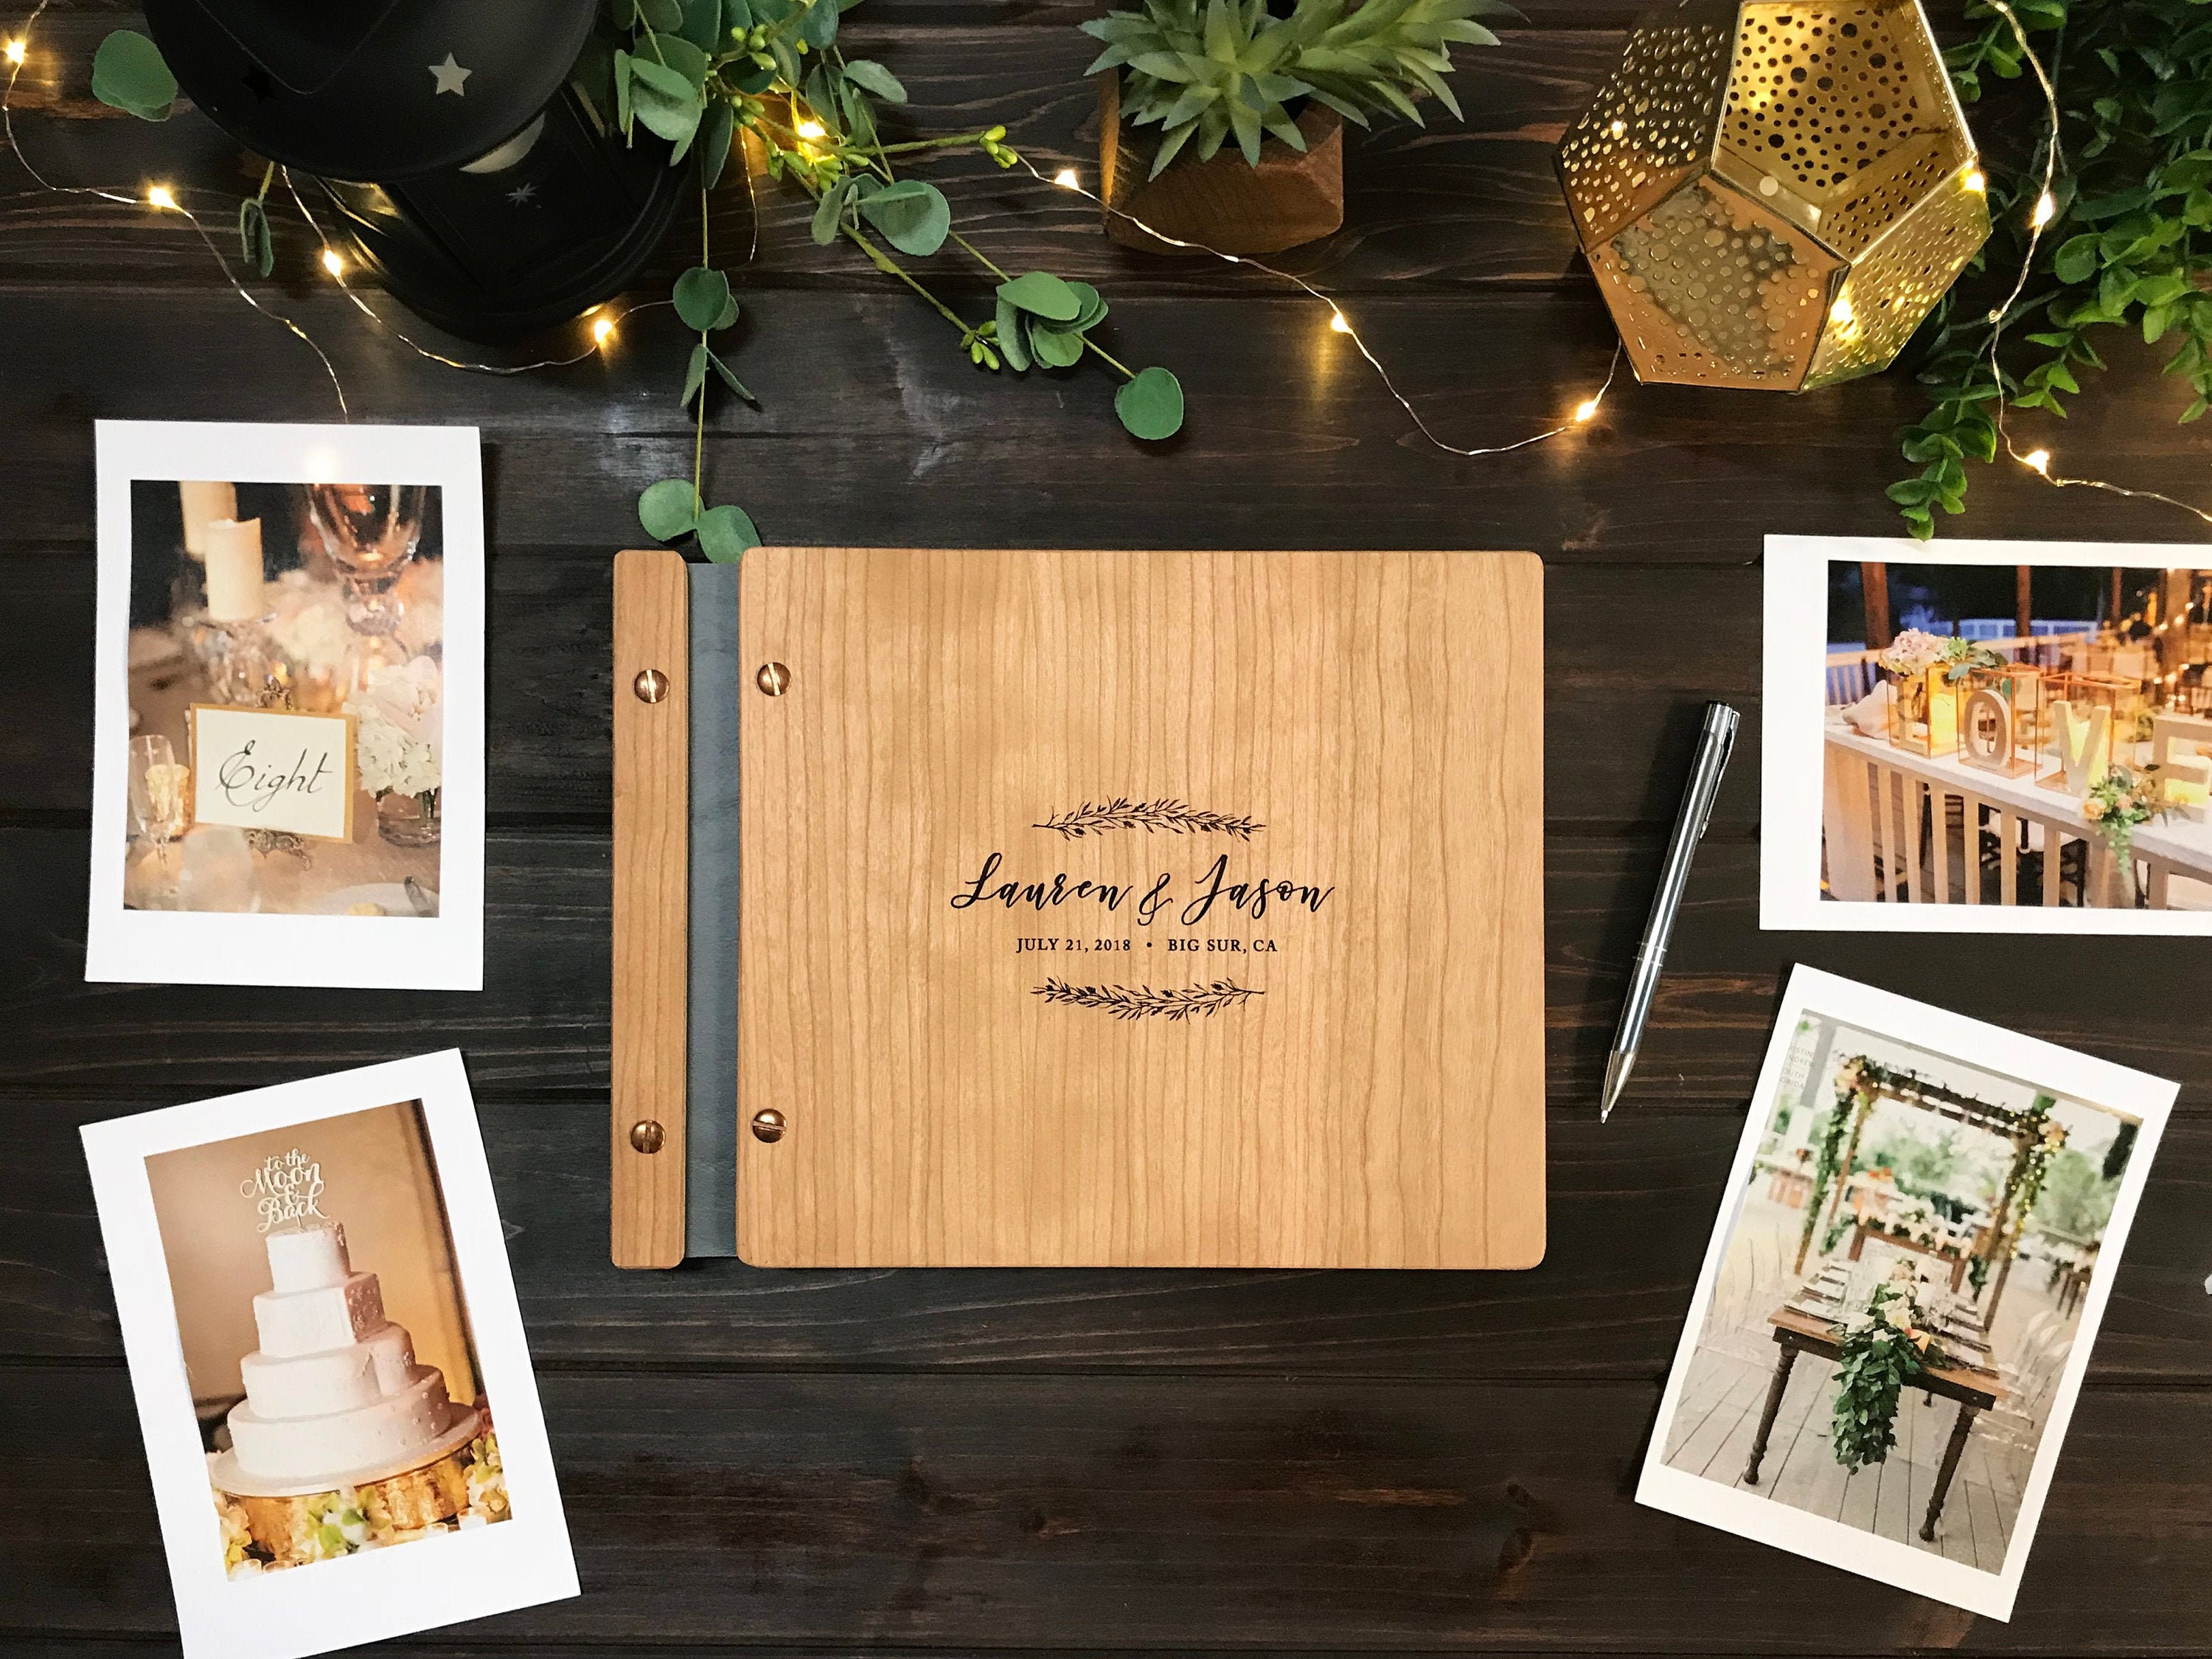 Wedding Guest Book, Personalized Photo Album, Decor, Photobooth Wooden Guestbook, Journal